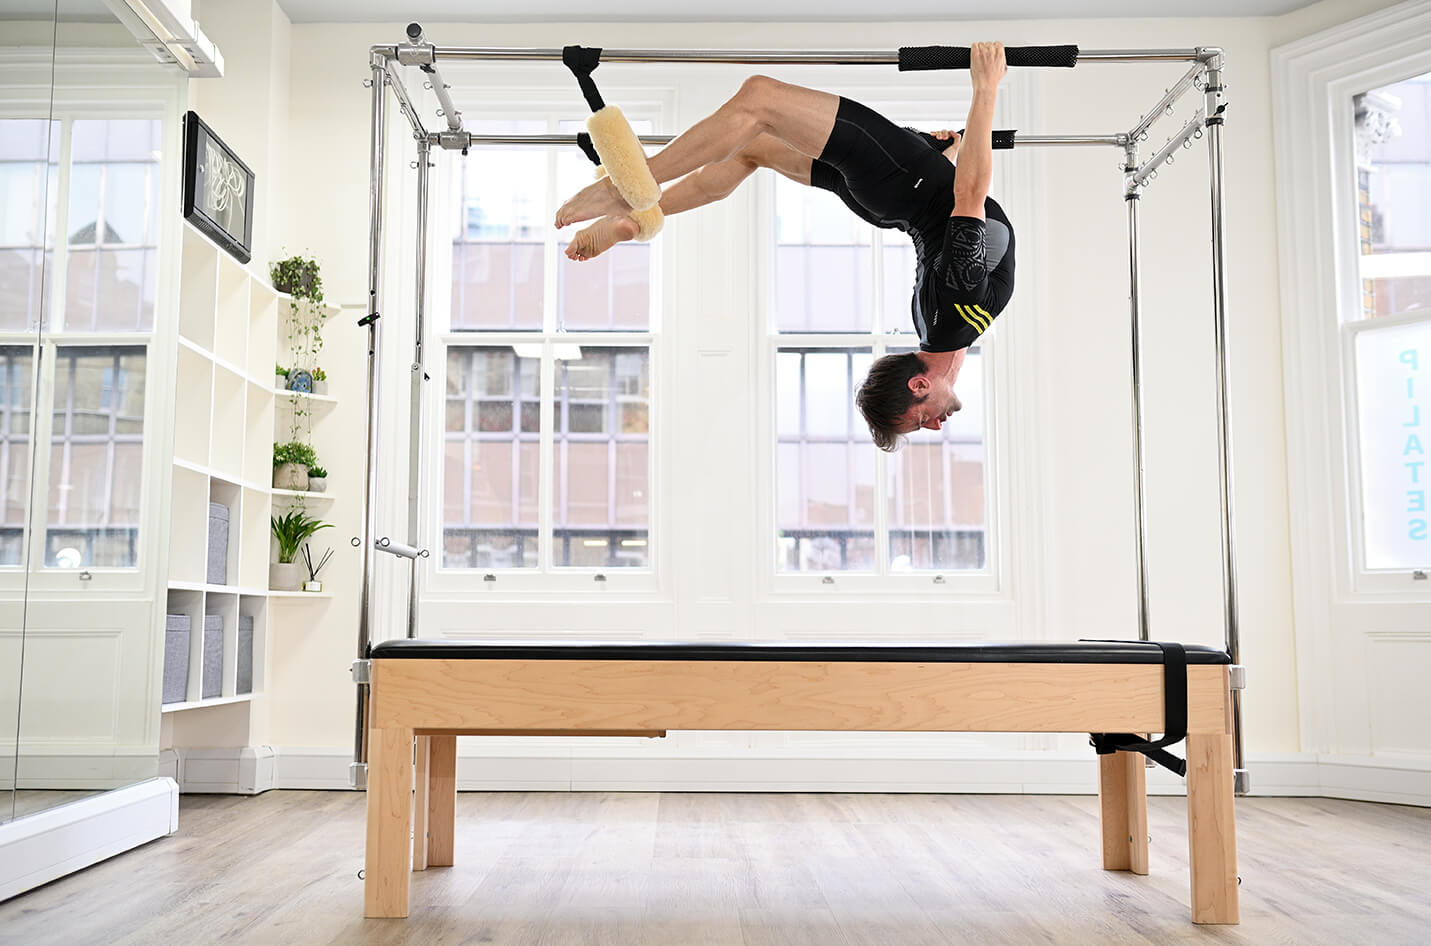 Pilates for circus performers